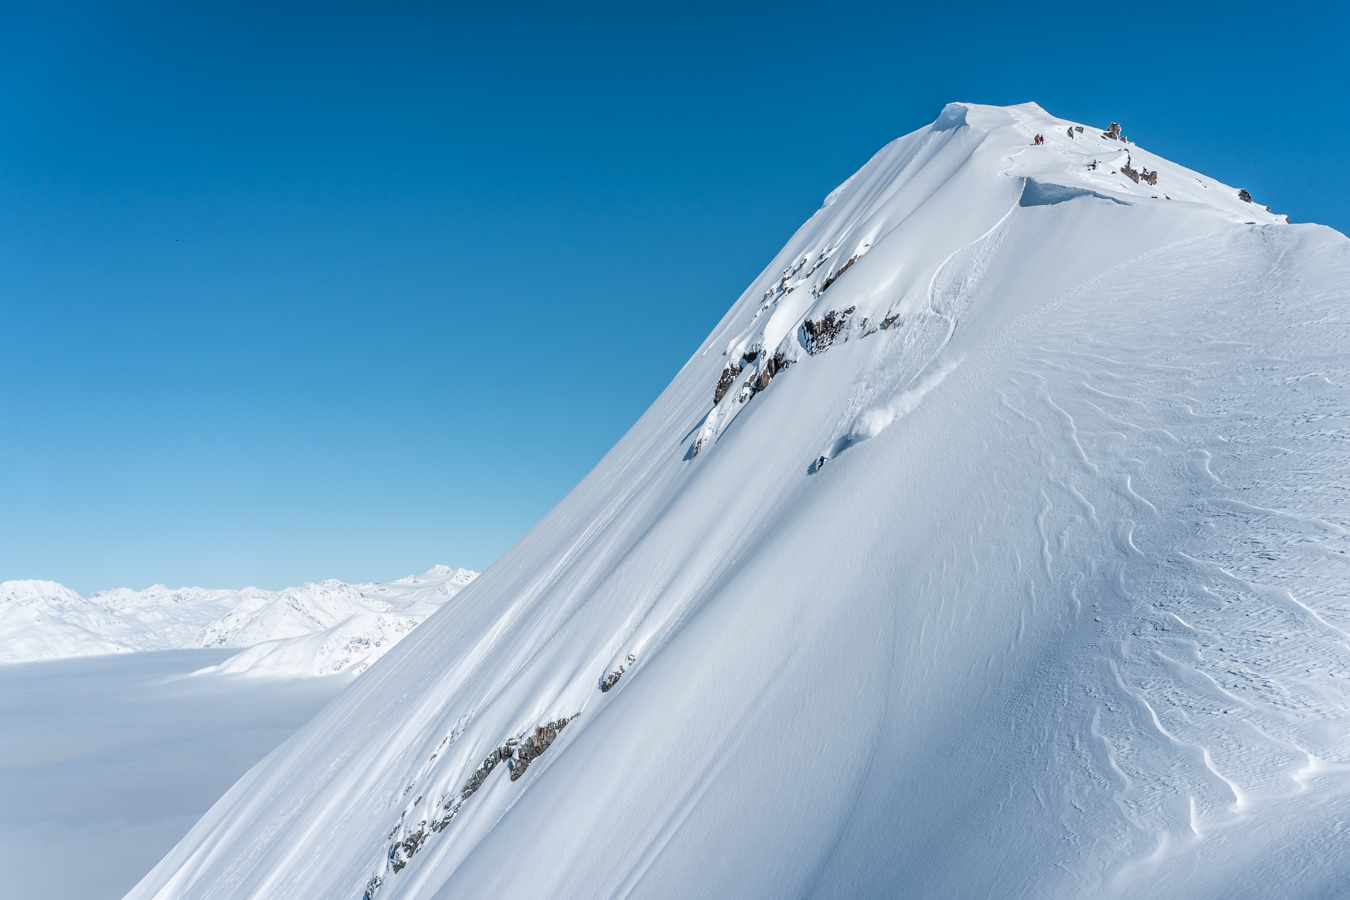 Snowboarding a huge peak in the Alaskan backcountry with Chugach Powder Guides